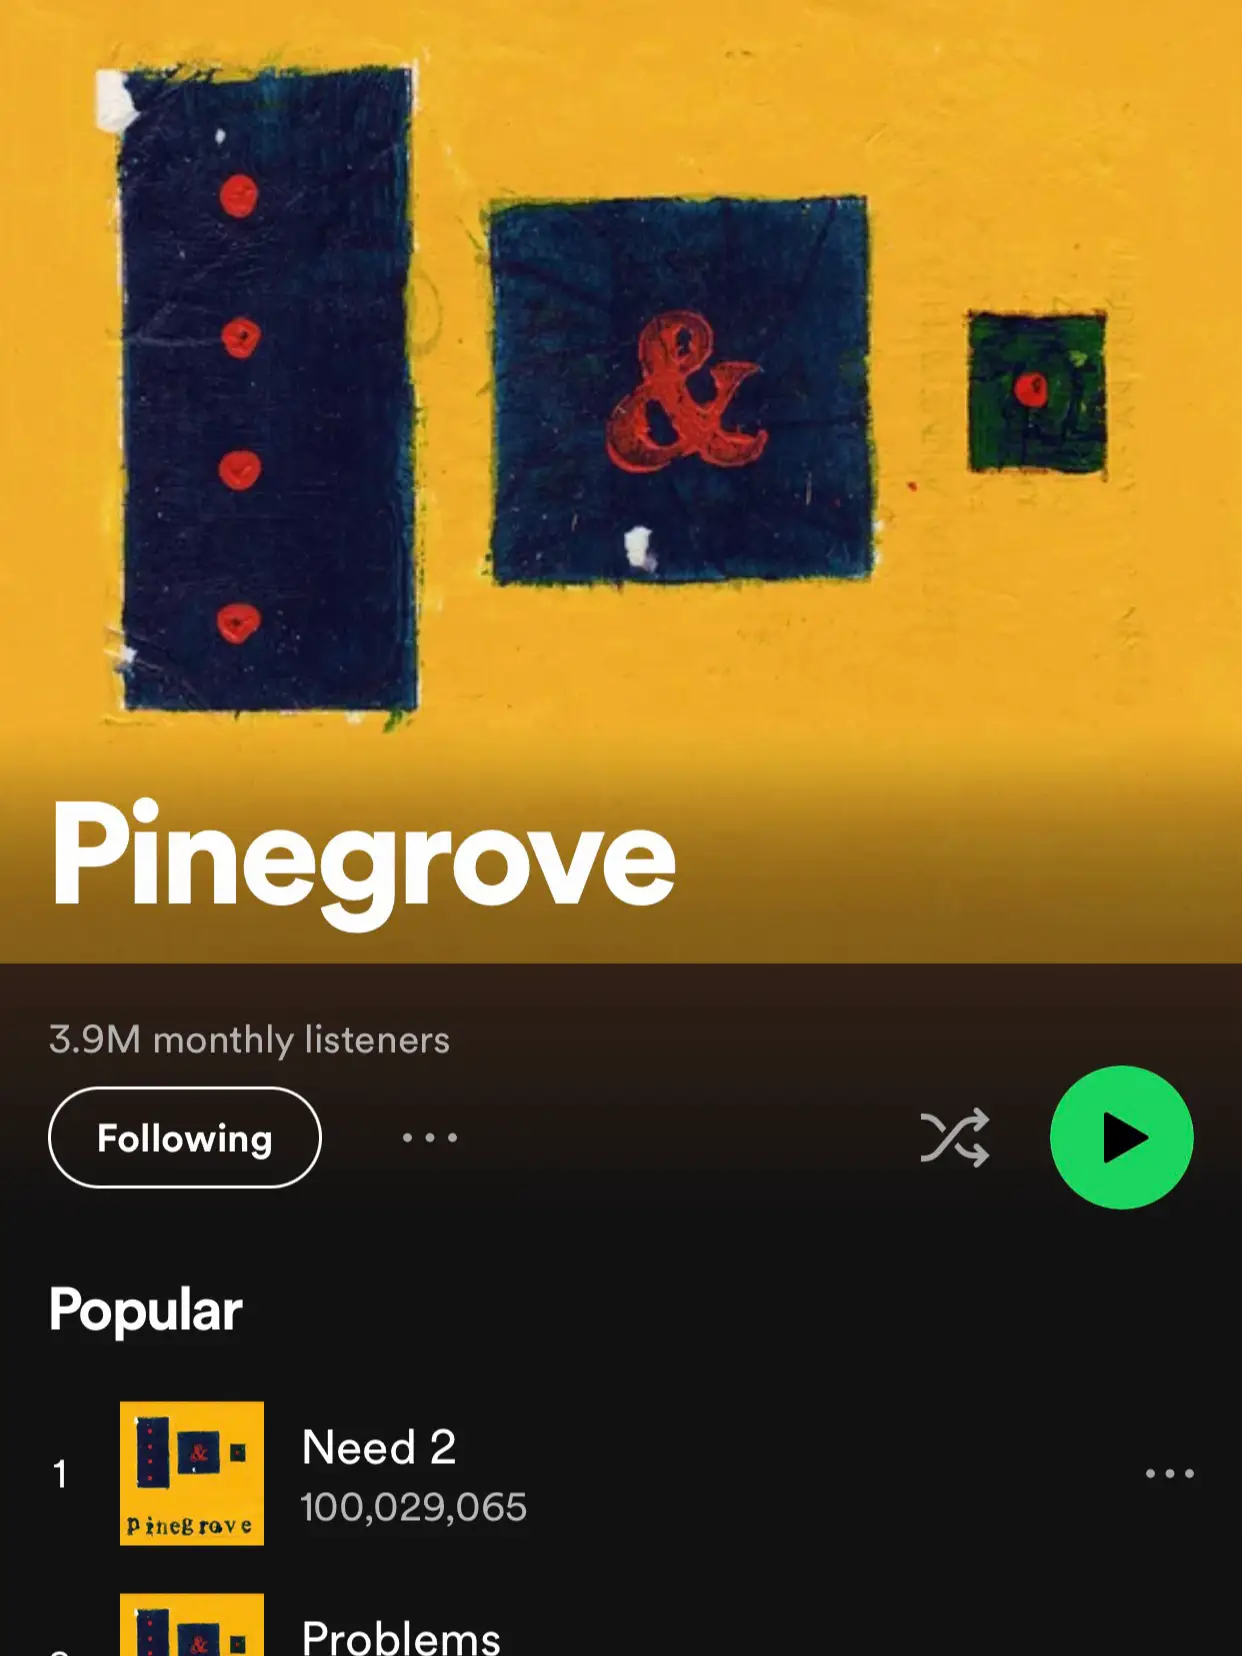  A list of music with the words "Pinegrove" and "Need 2 1 100,029,65" at the top.